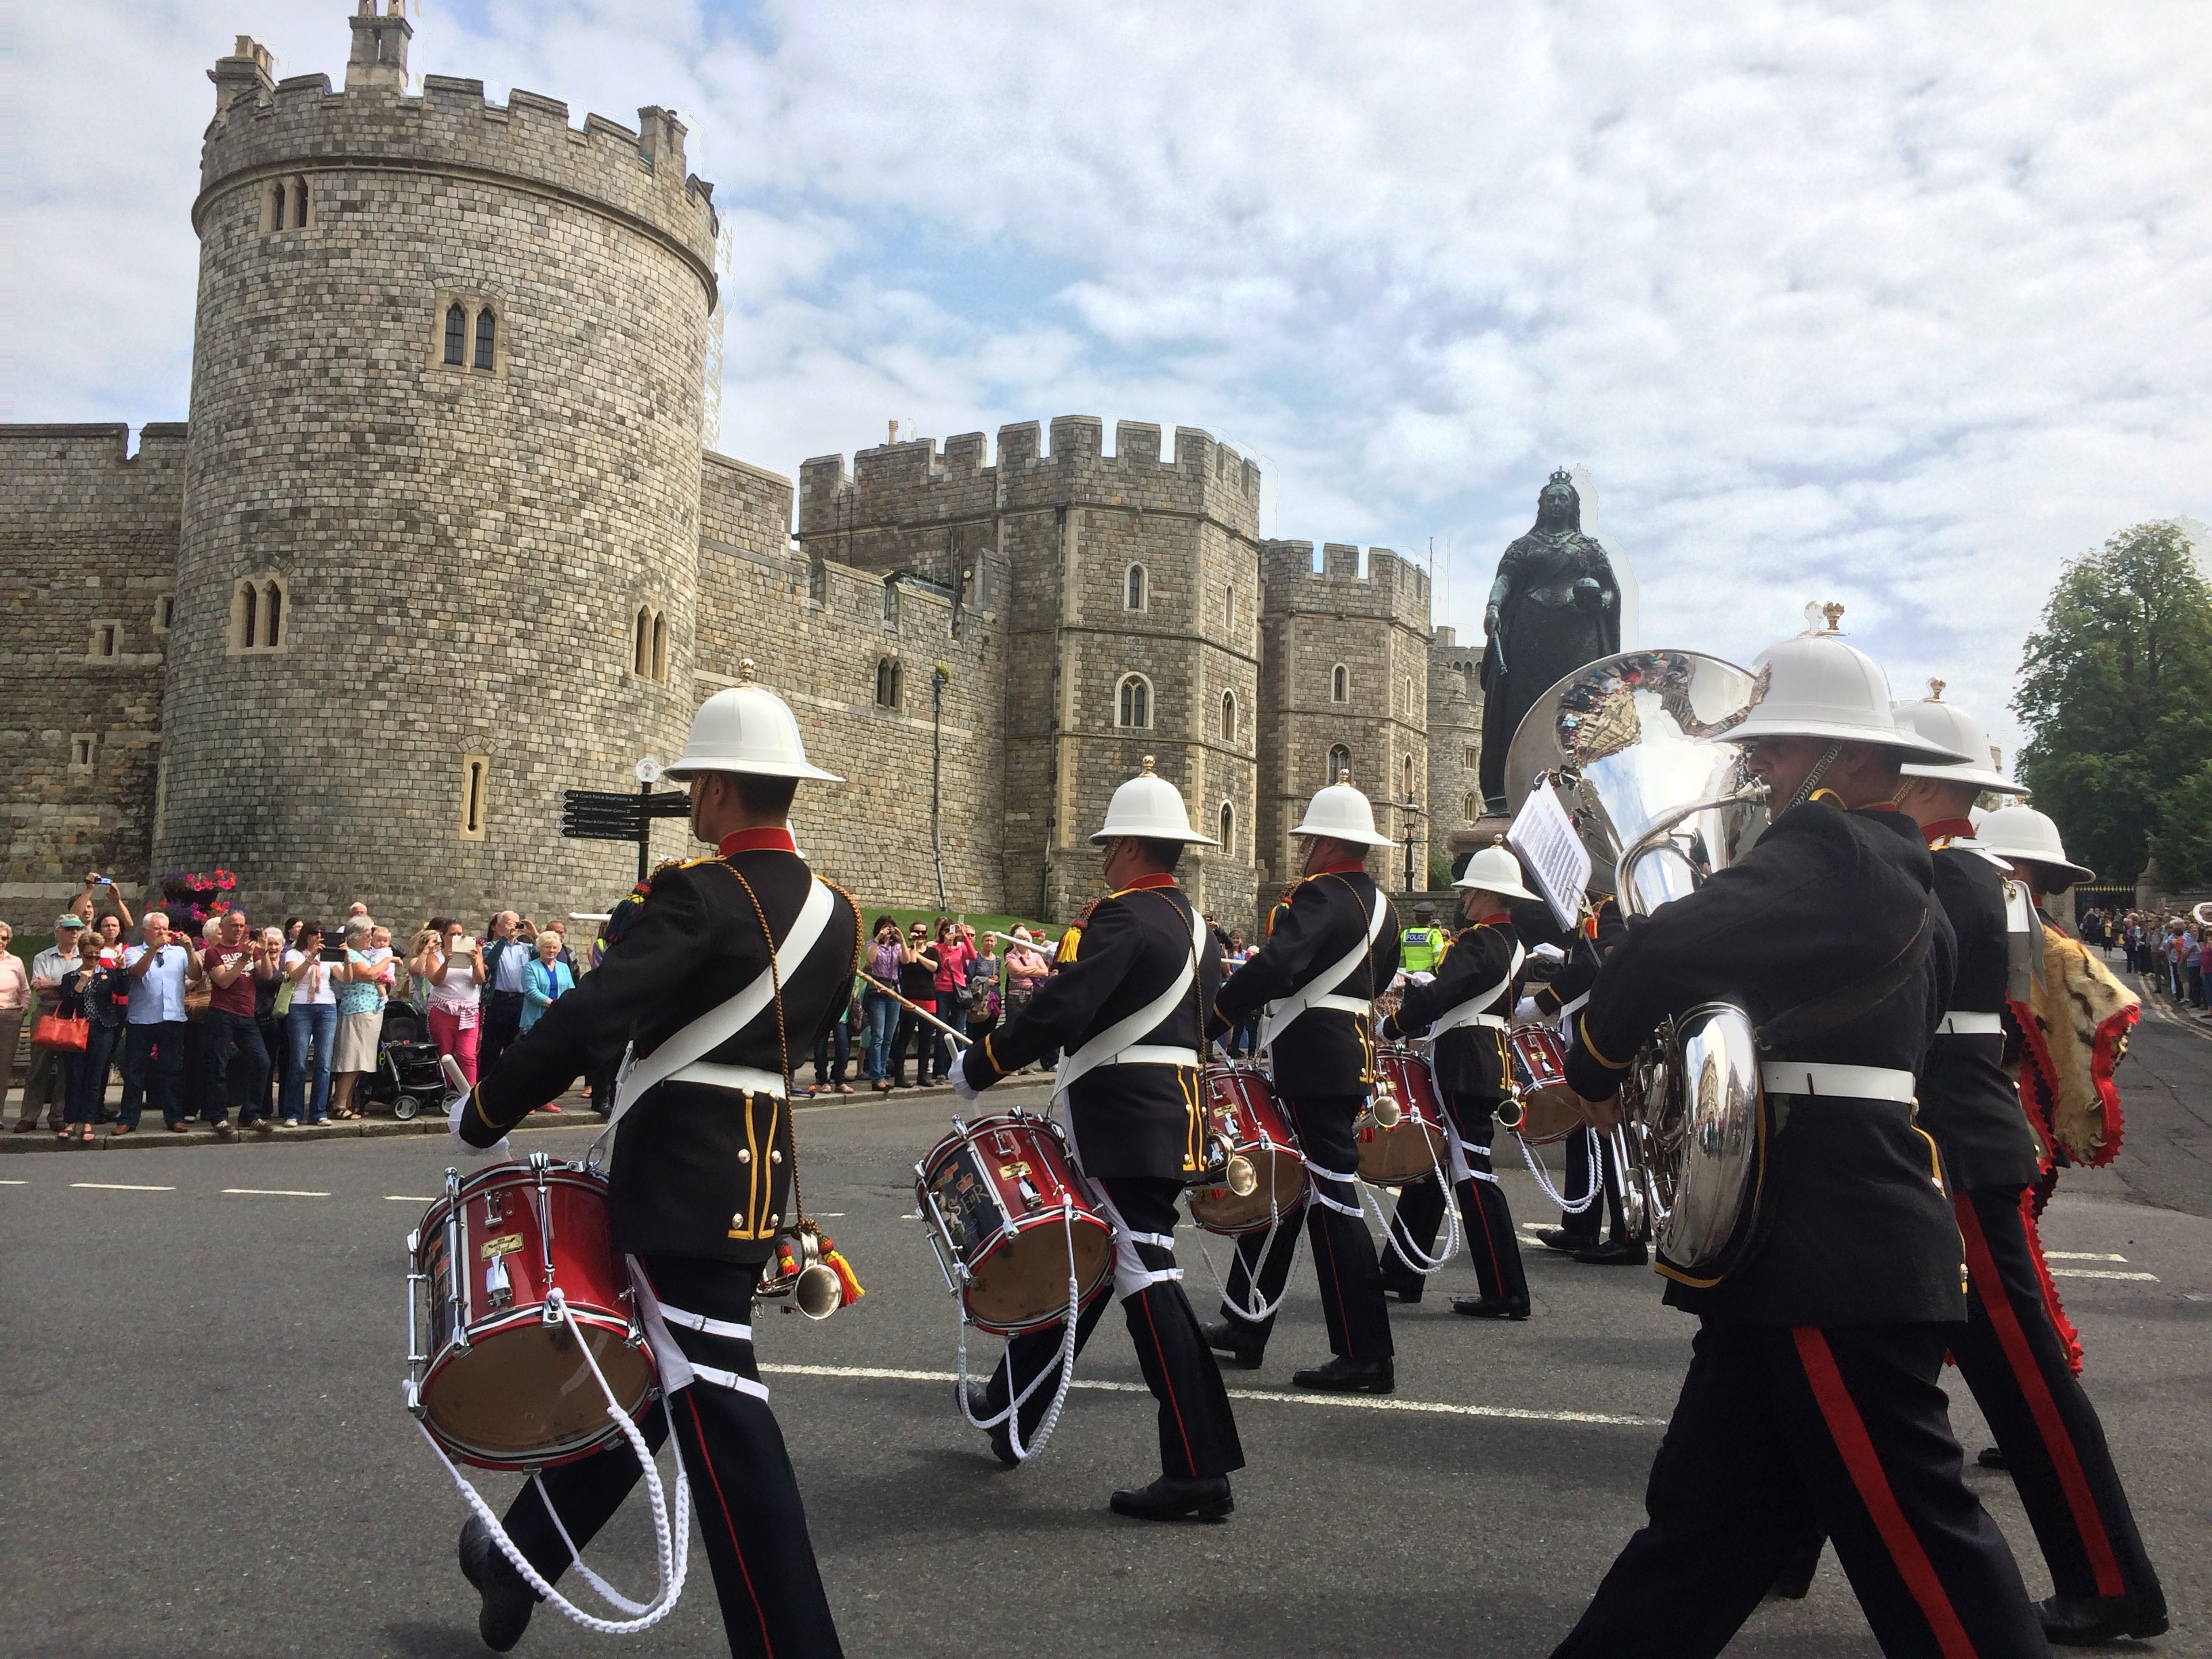 The near-daily Changing the Guard, outside Windsor Castle.